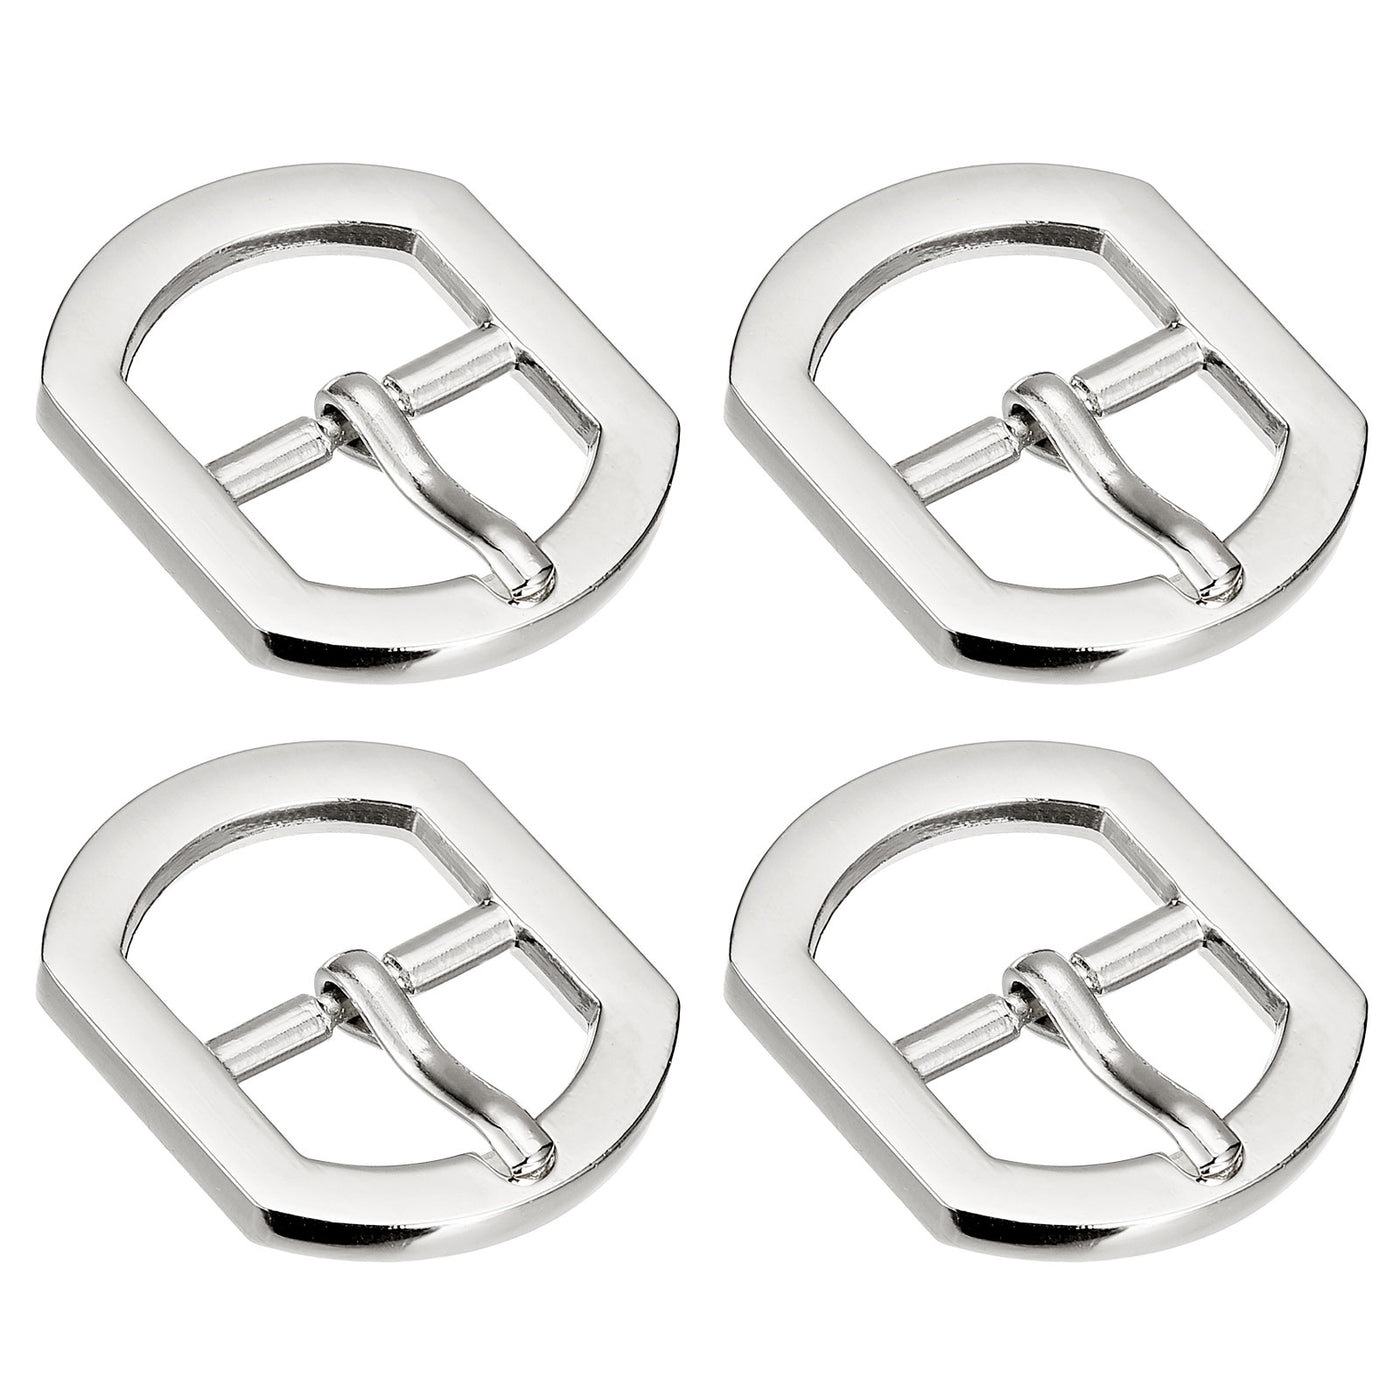 uxcell Uxcell 4Pcs 0.75" Single Prong Belt Buckle Square Center Bar Buckles for Belt, Silver